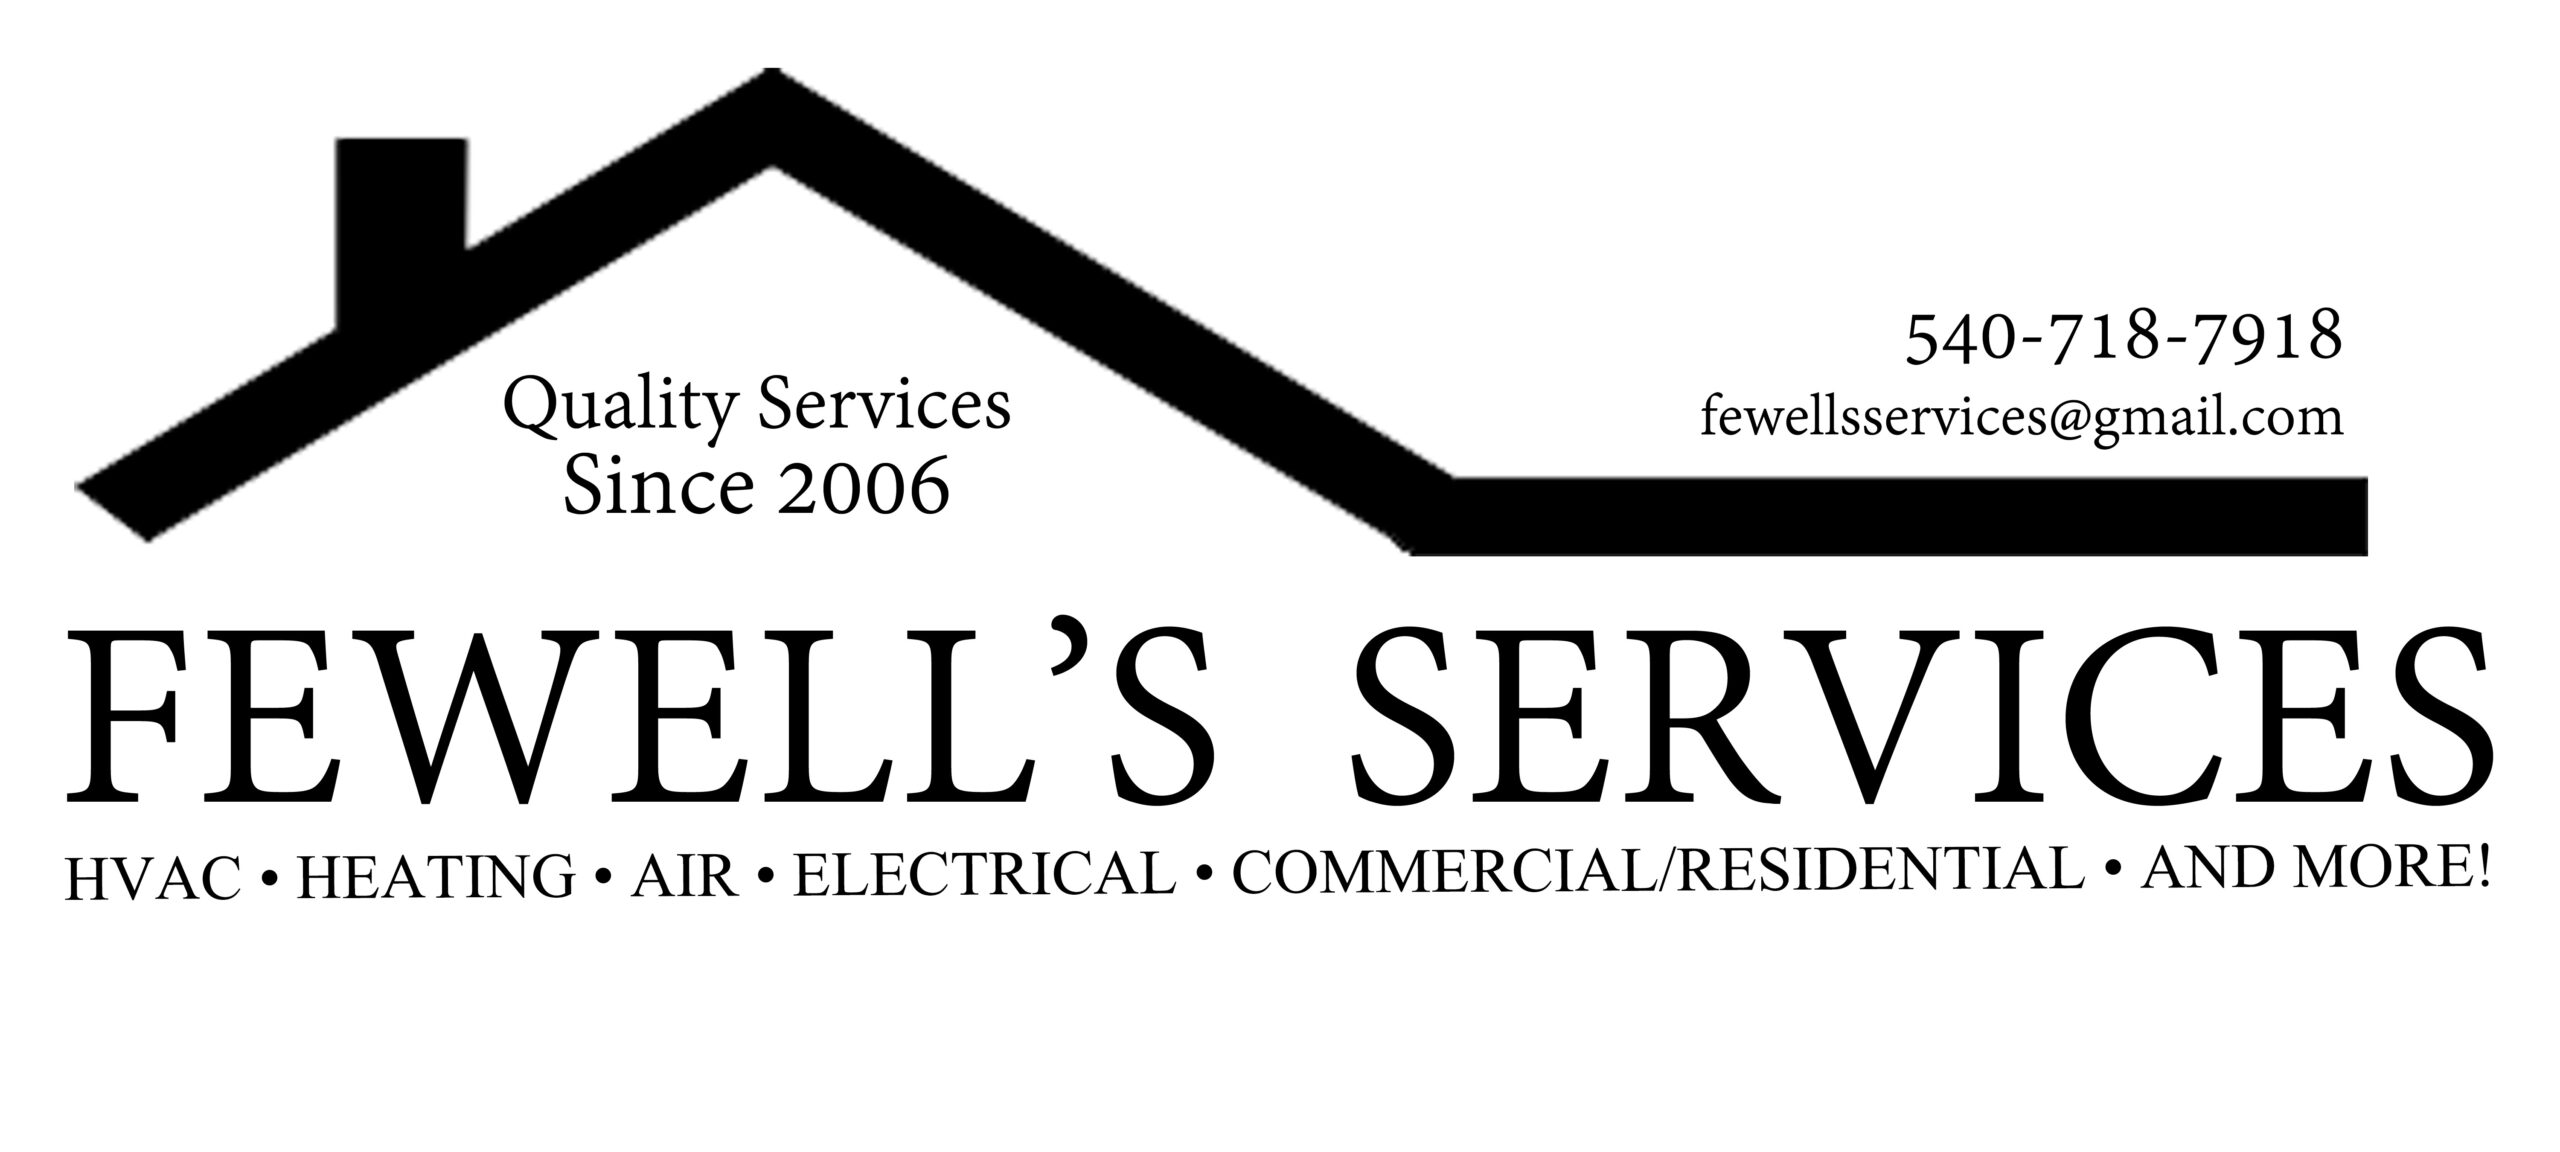 Fewell's Services — HVAC & Electrical Services in Culpeper, Warrenton, and Beyond!